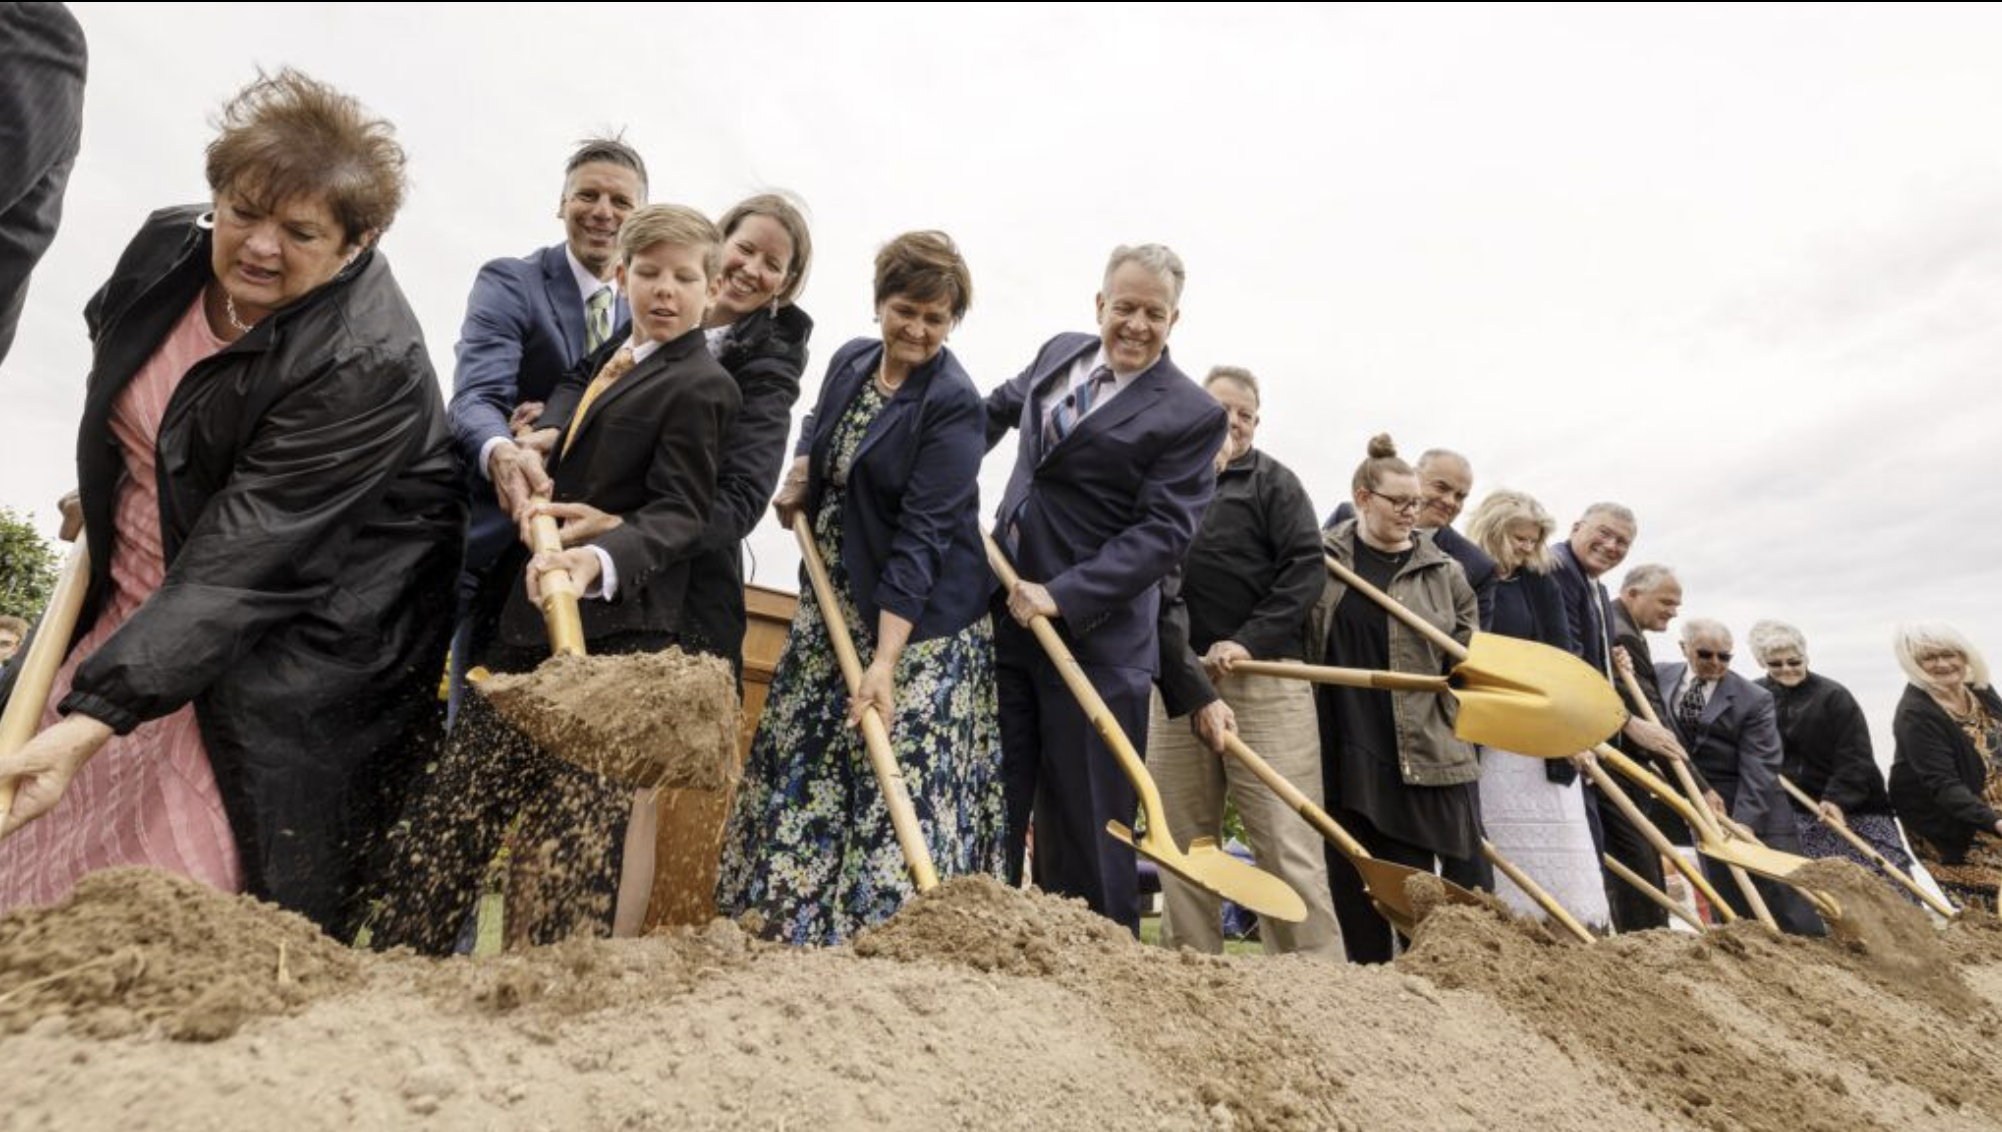 Elder Brent H. Nielson of the Seventy of The Church of Jesus Christ of Latter-day Saints, and his wife, Sister Marcia Nielson, are joined by others in turning over soil as Burley, Idaho, and surrounding-area residents gather to take part in the groundbreaking of the Burley Idaho Temple of The Church of Jesus Christ of Latter-day Saints.